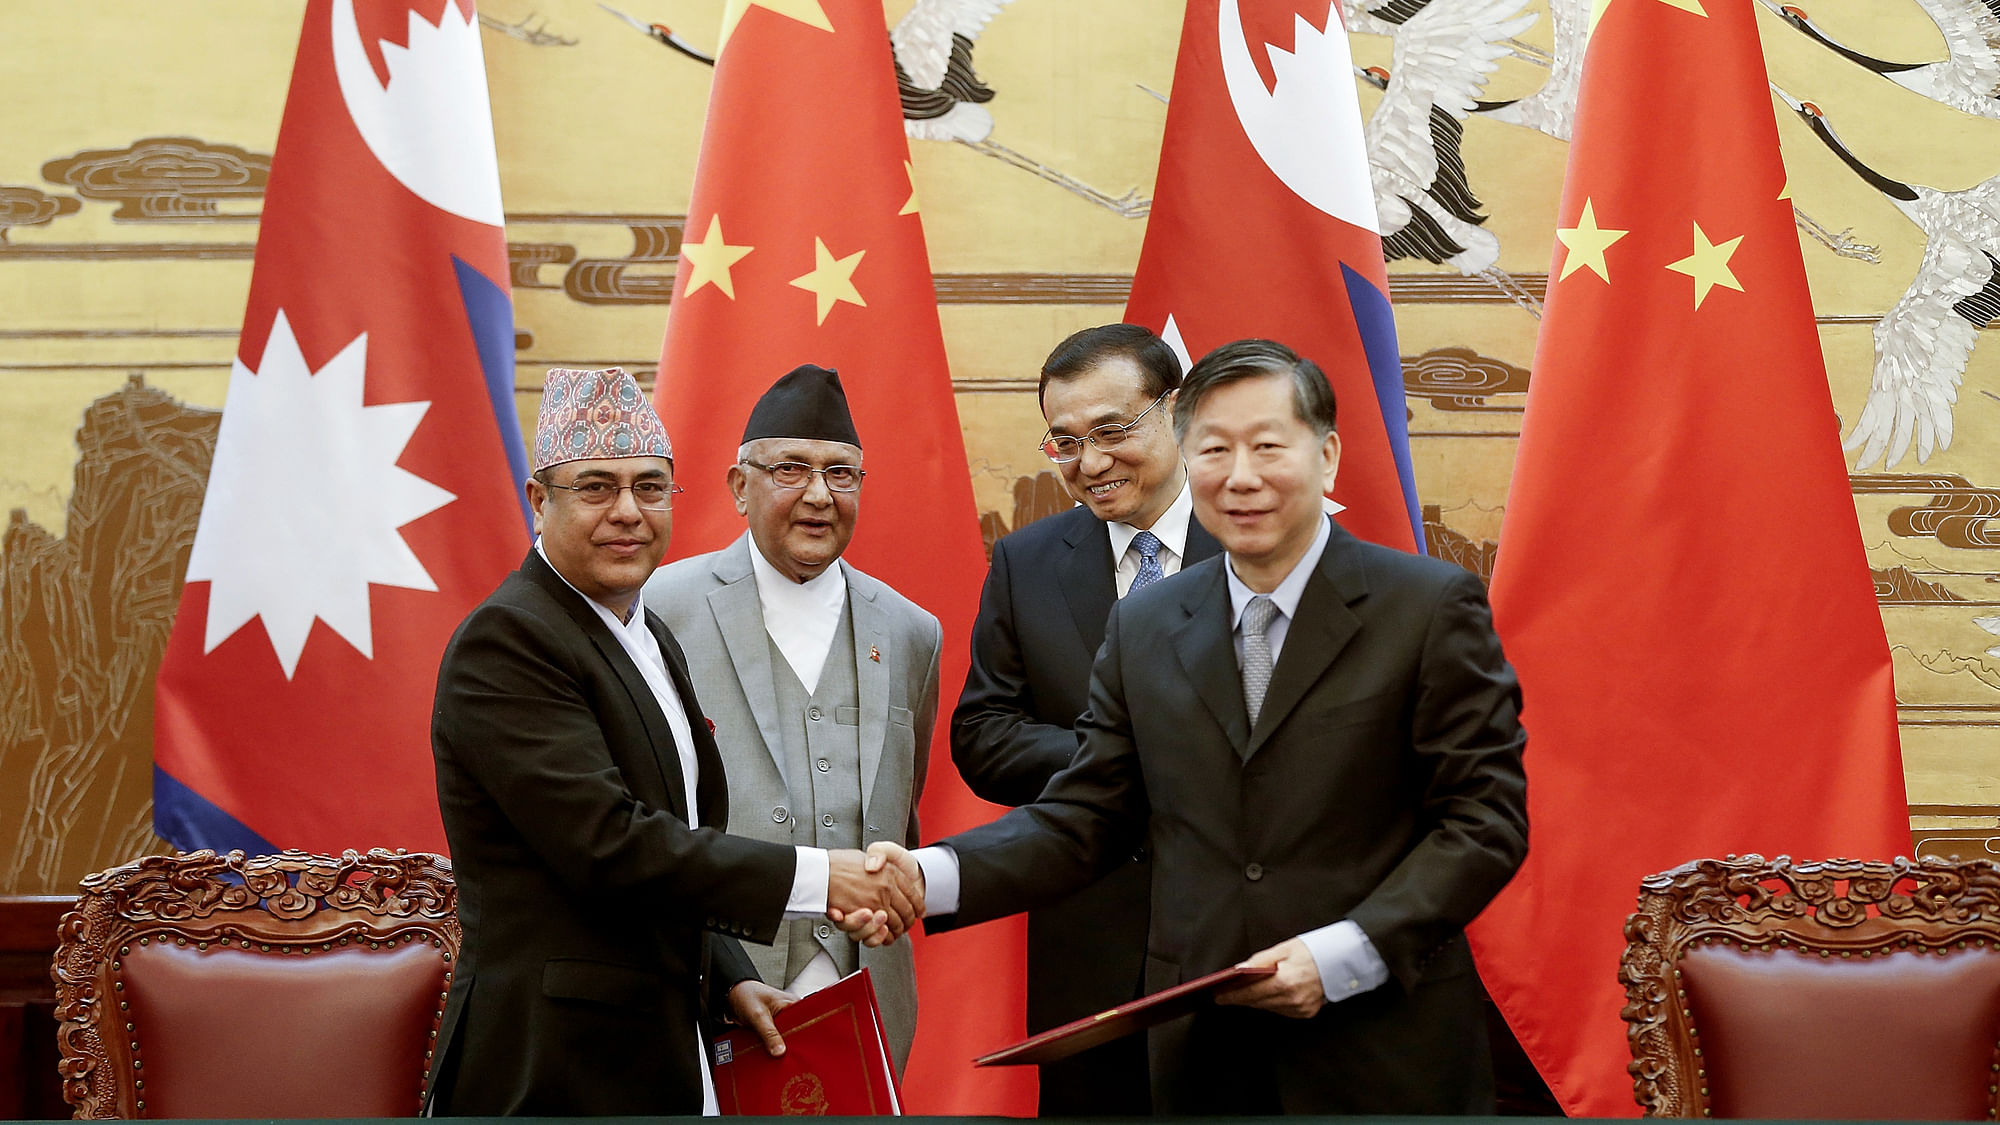 Chinese Premier Li Keqiang, rear right, with Nepal’s Prime Minister Khadga Prasad Oli, rear left, attend a signing ceremony at the Great Hall of the People Monday, March 21, 2016 in Beijing, China. (Photo Courtesy: Lintao Zhang/Pool Photo via AP)